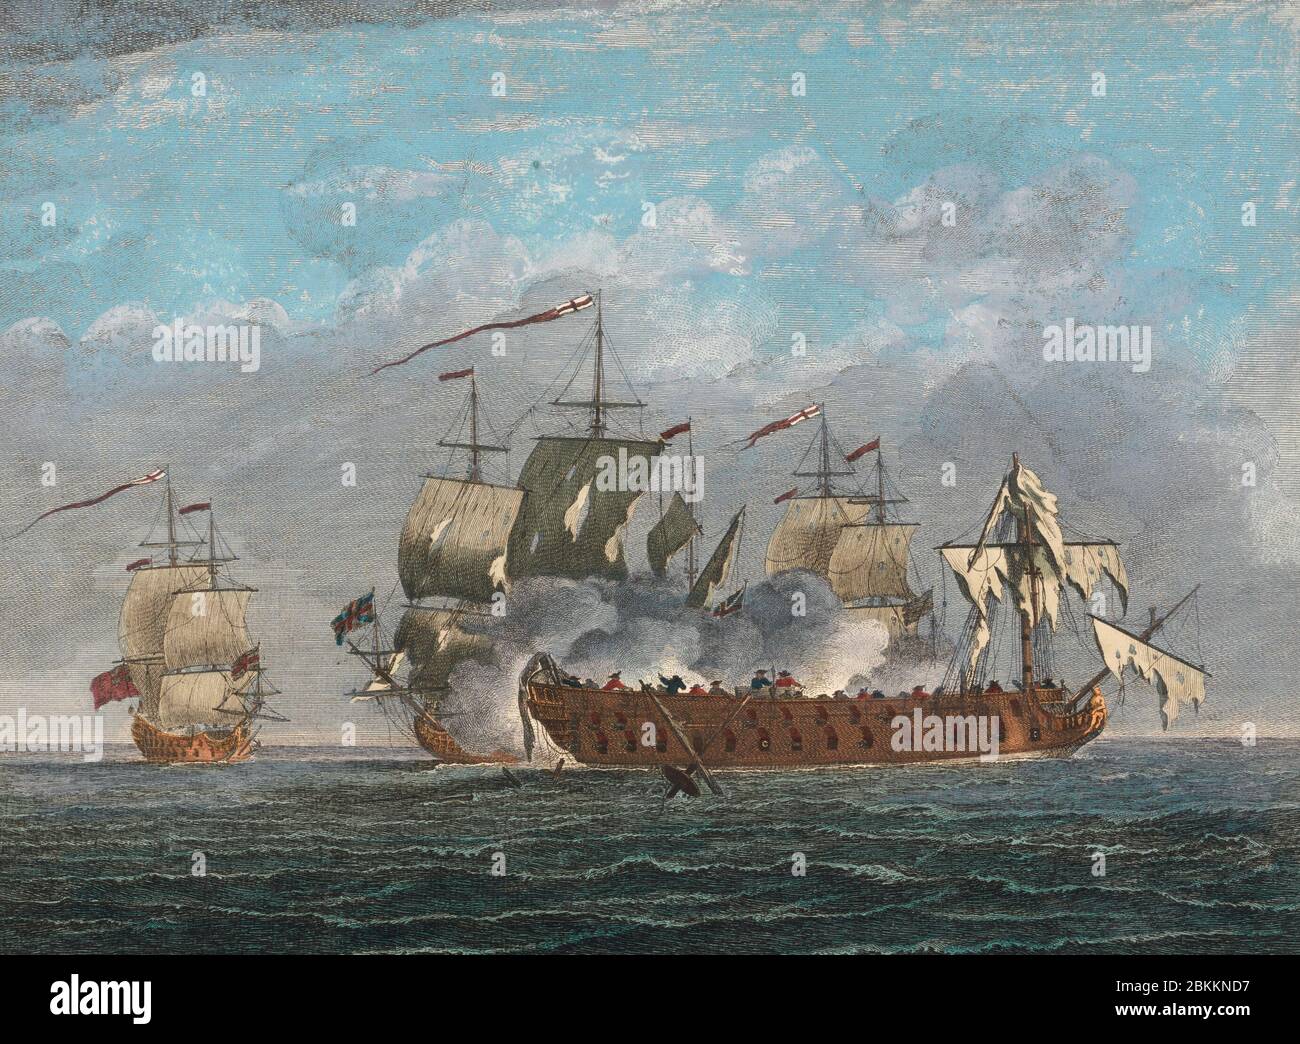 The taking of the Princessa a Spanish Man of War, April 8, 1740 by His Majesties Ships the Lenox, Kent, and Oxford - Nathaniel Parr, circa 1740 Stock Photo